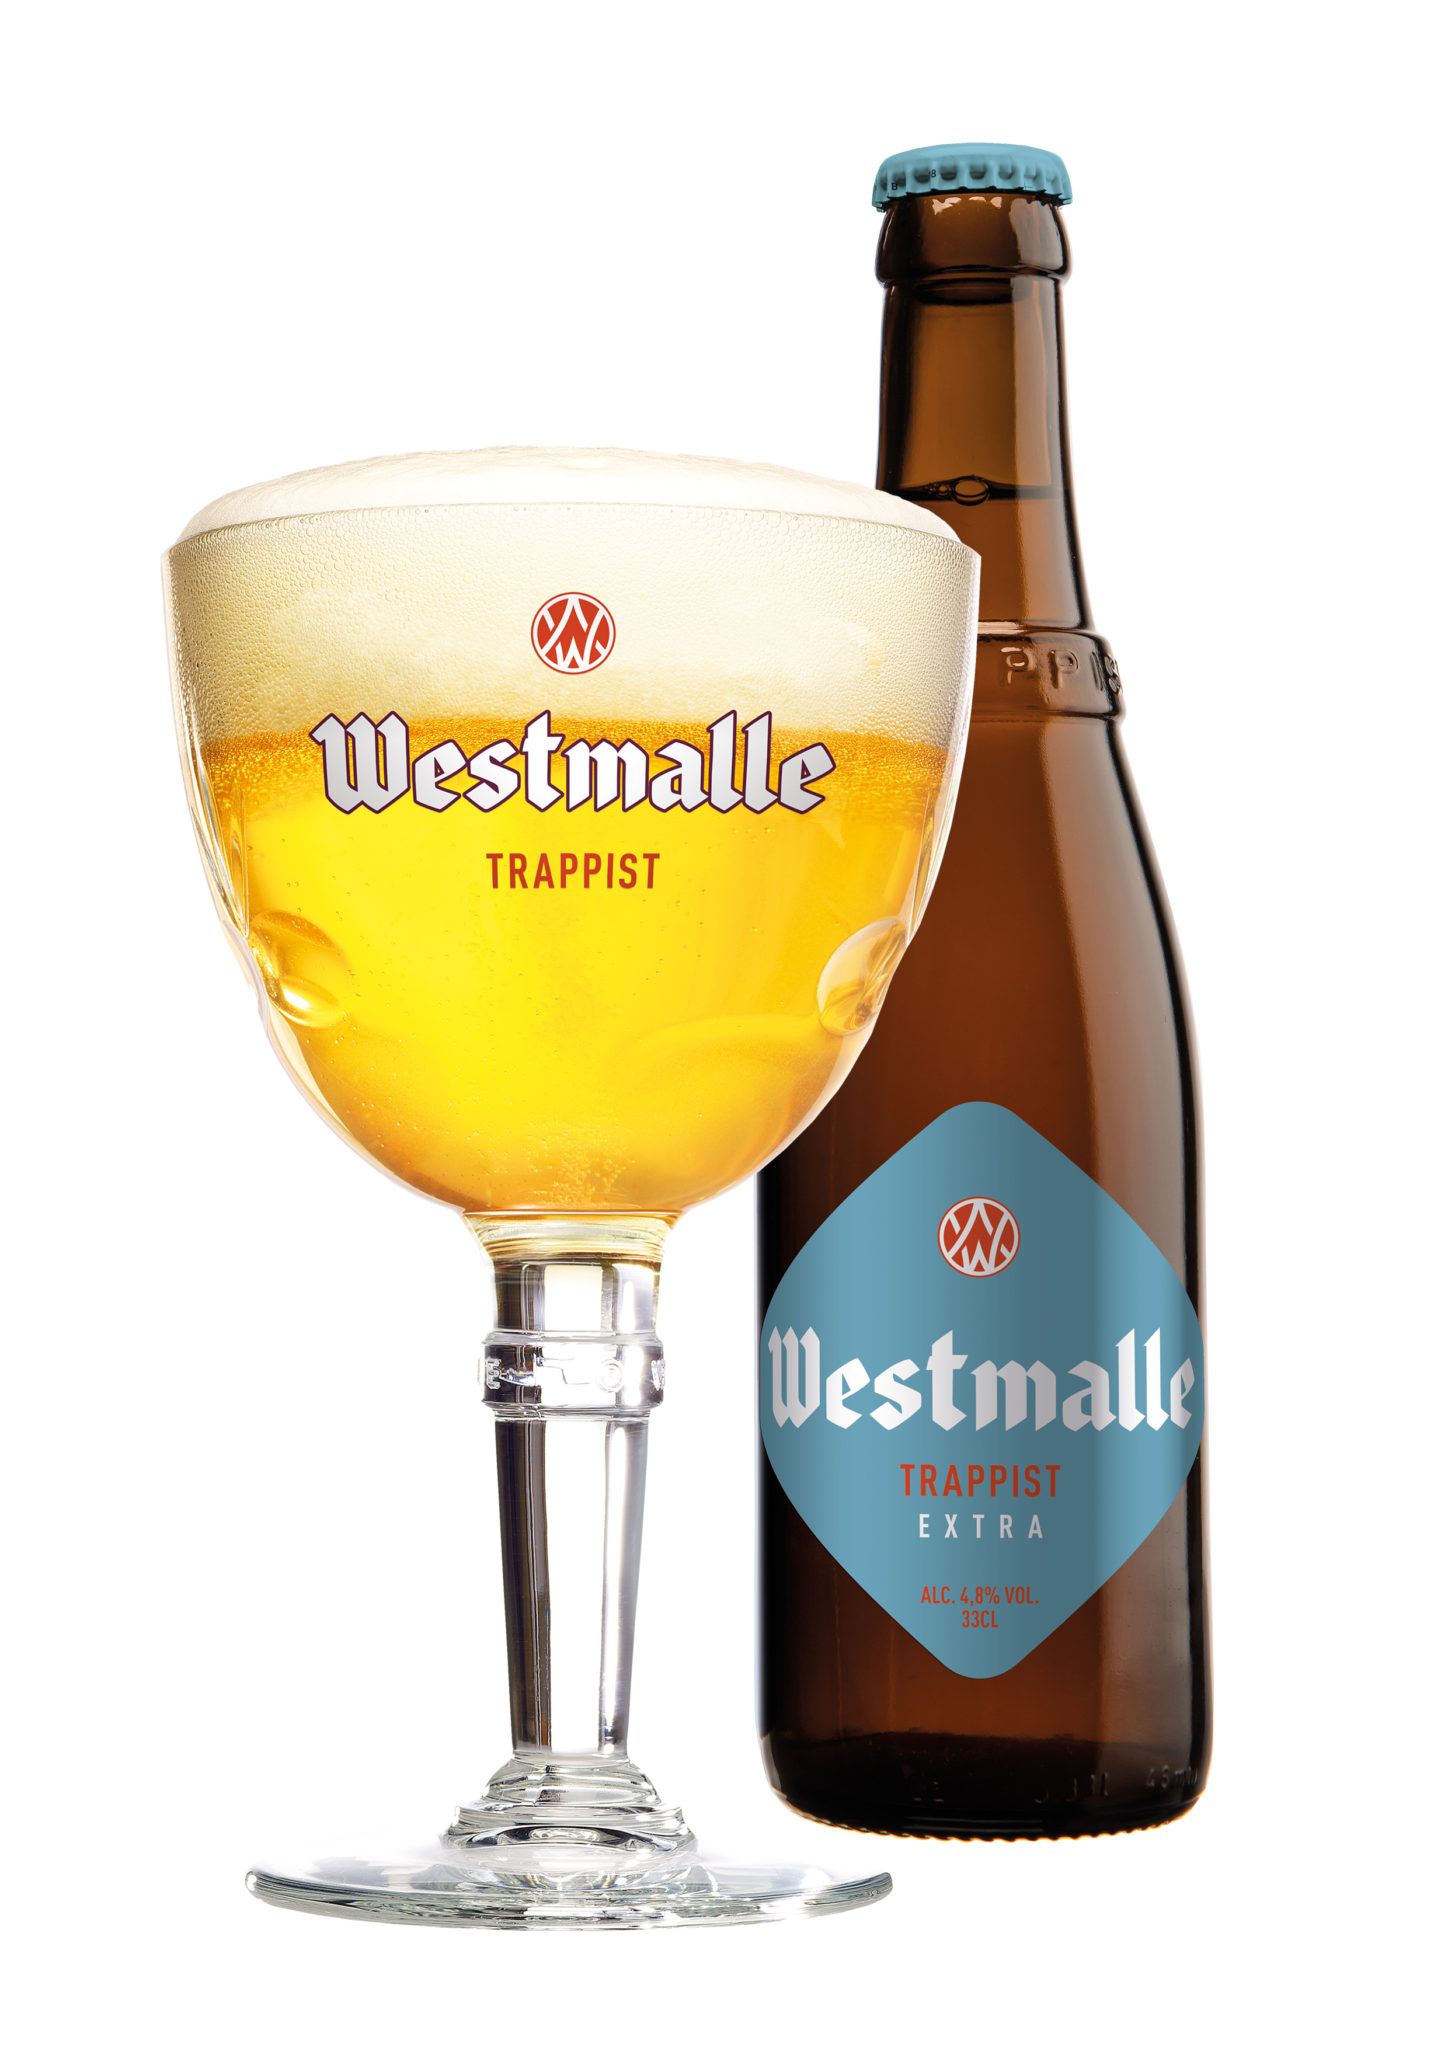 Westmalle Extra Released in the UK